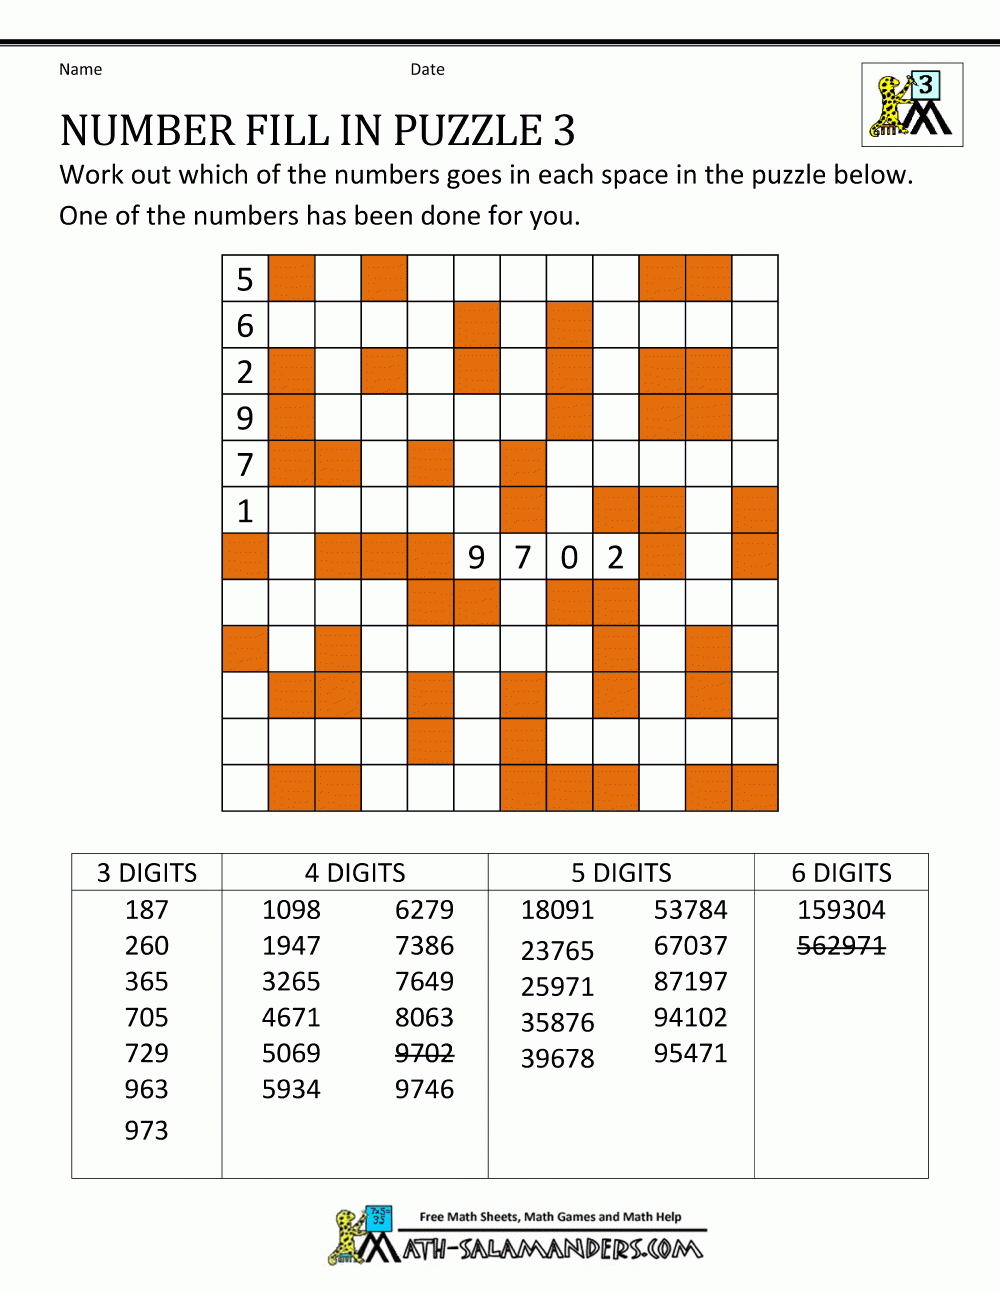 Math Puzzles For Kids Number Fill In Puzzle 3 | Spot The . Games - Printable Crossword Puzzles #3